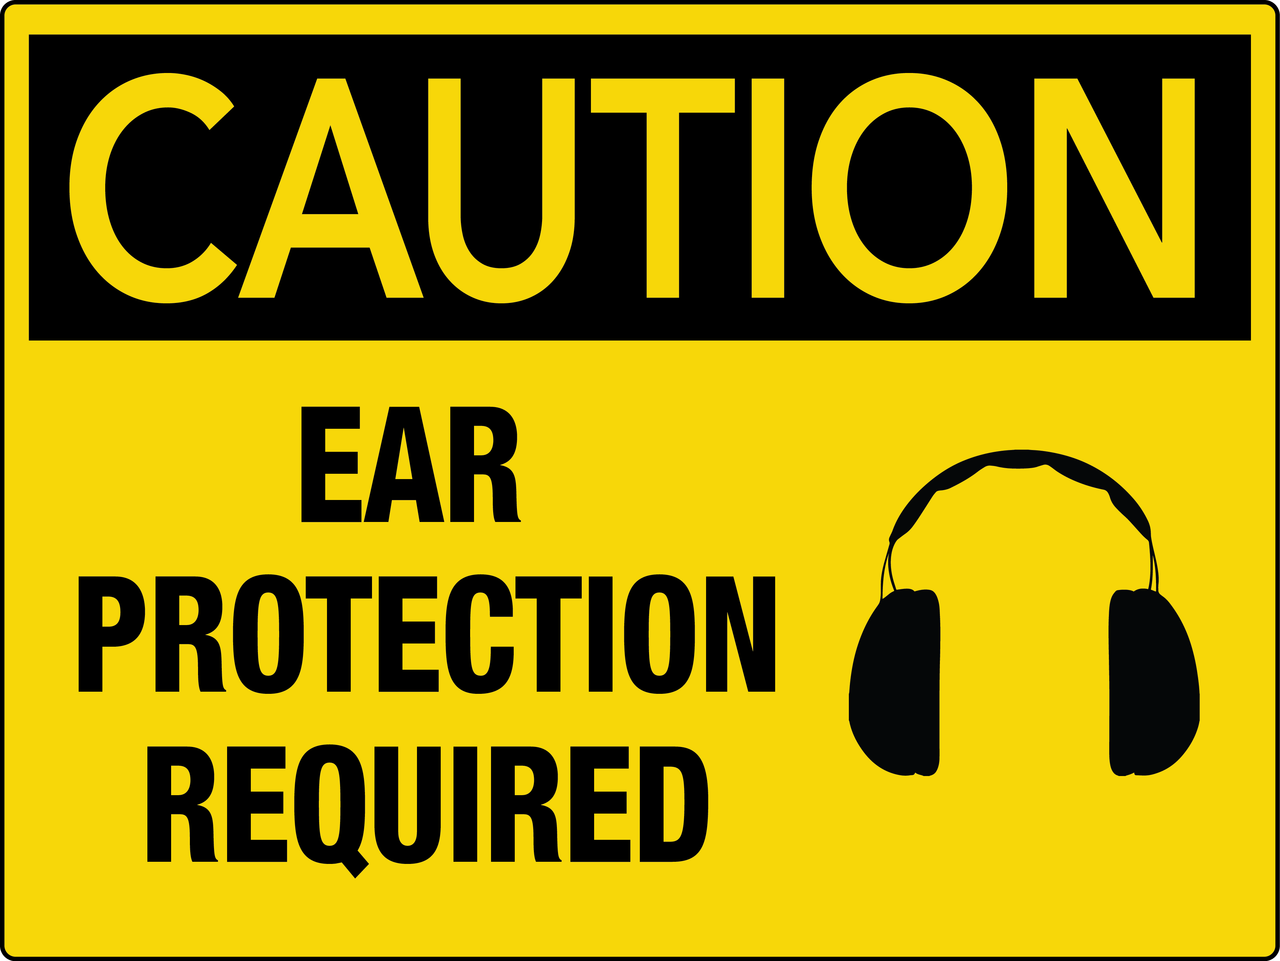 Caution Ear Protection Required Wall Sign